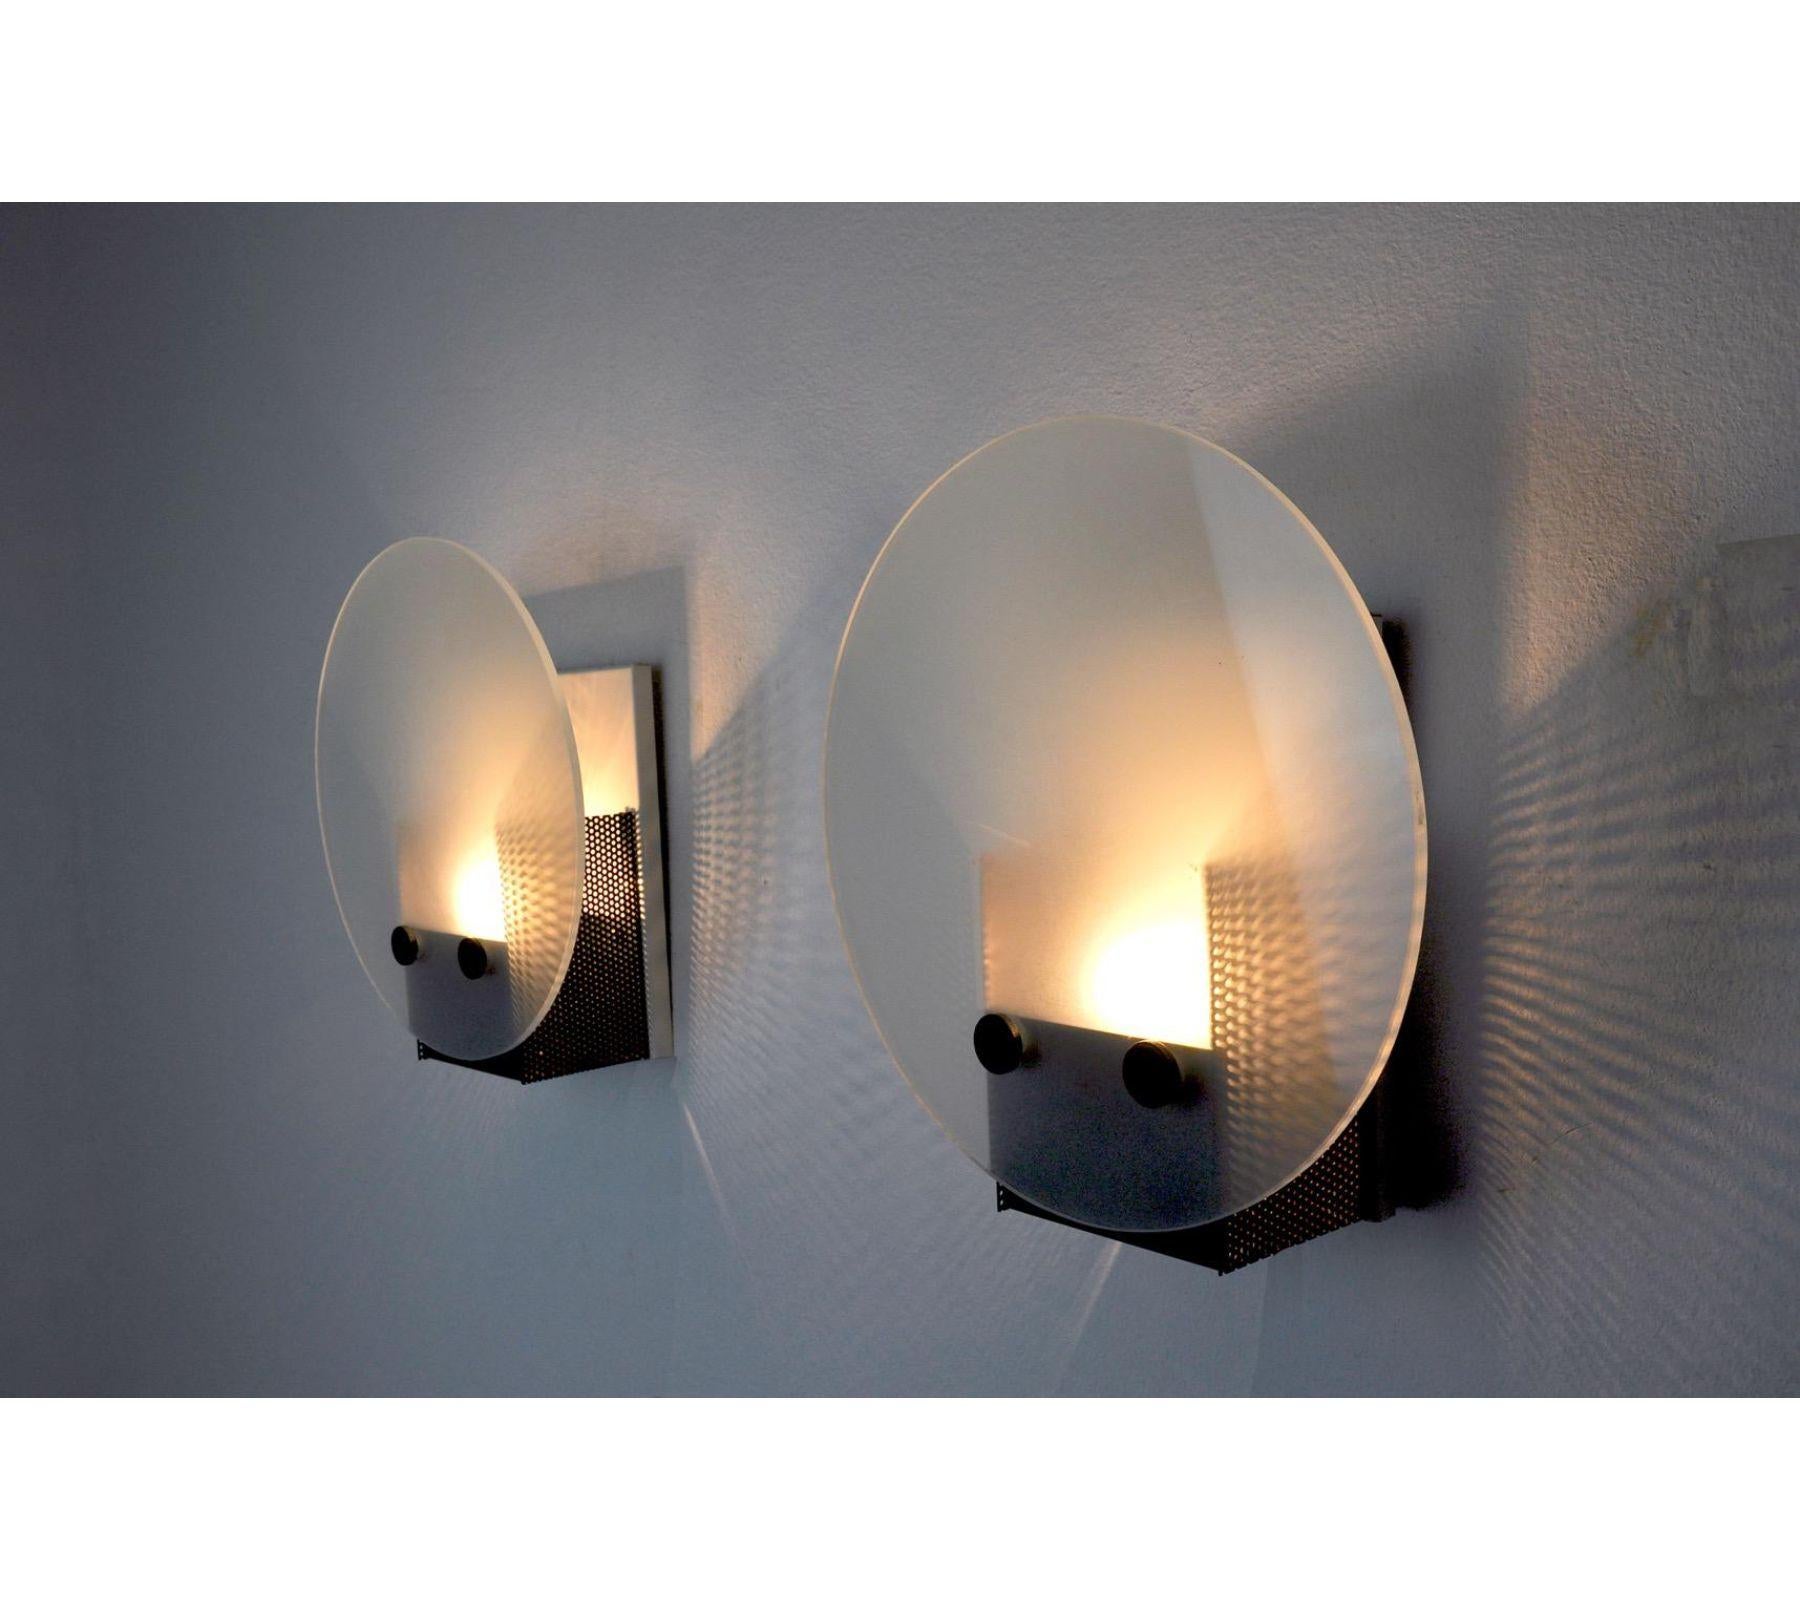 Late 20th Century 1970s Memphis Styled Wall Lamps, Spain, a Pair For Sale